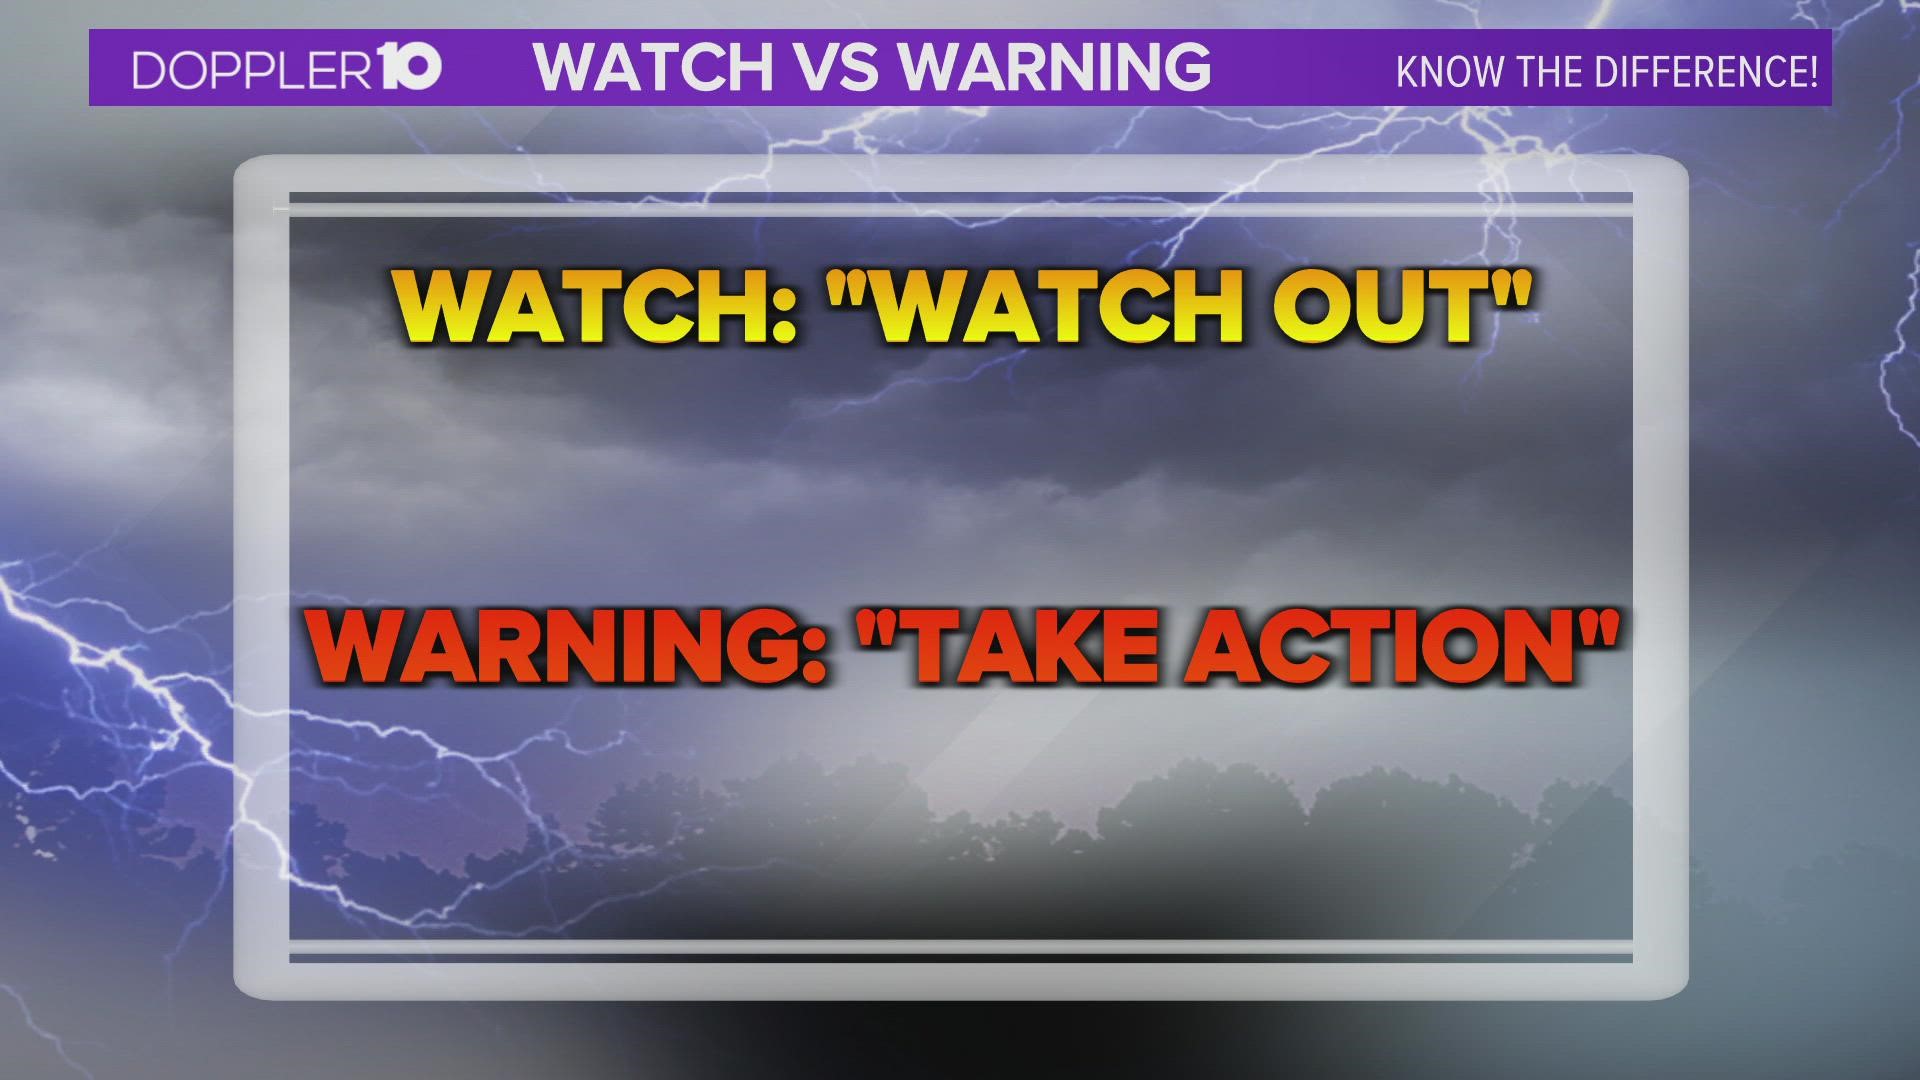 Watches are issued hours ahead of an impending storm while warnings happen when severe weather is occurring.